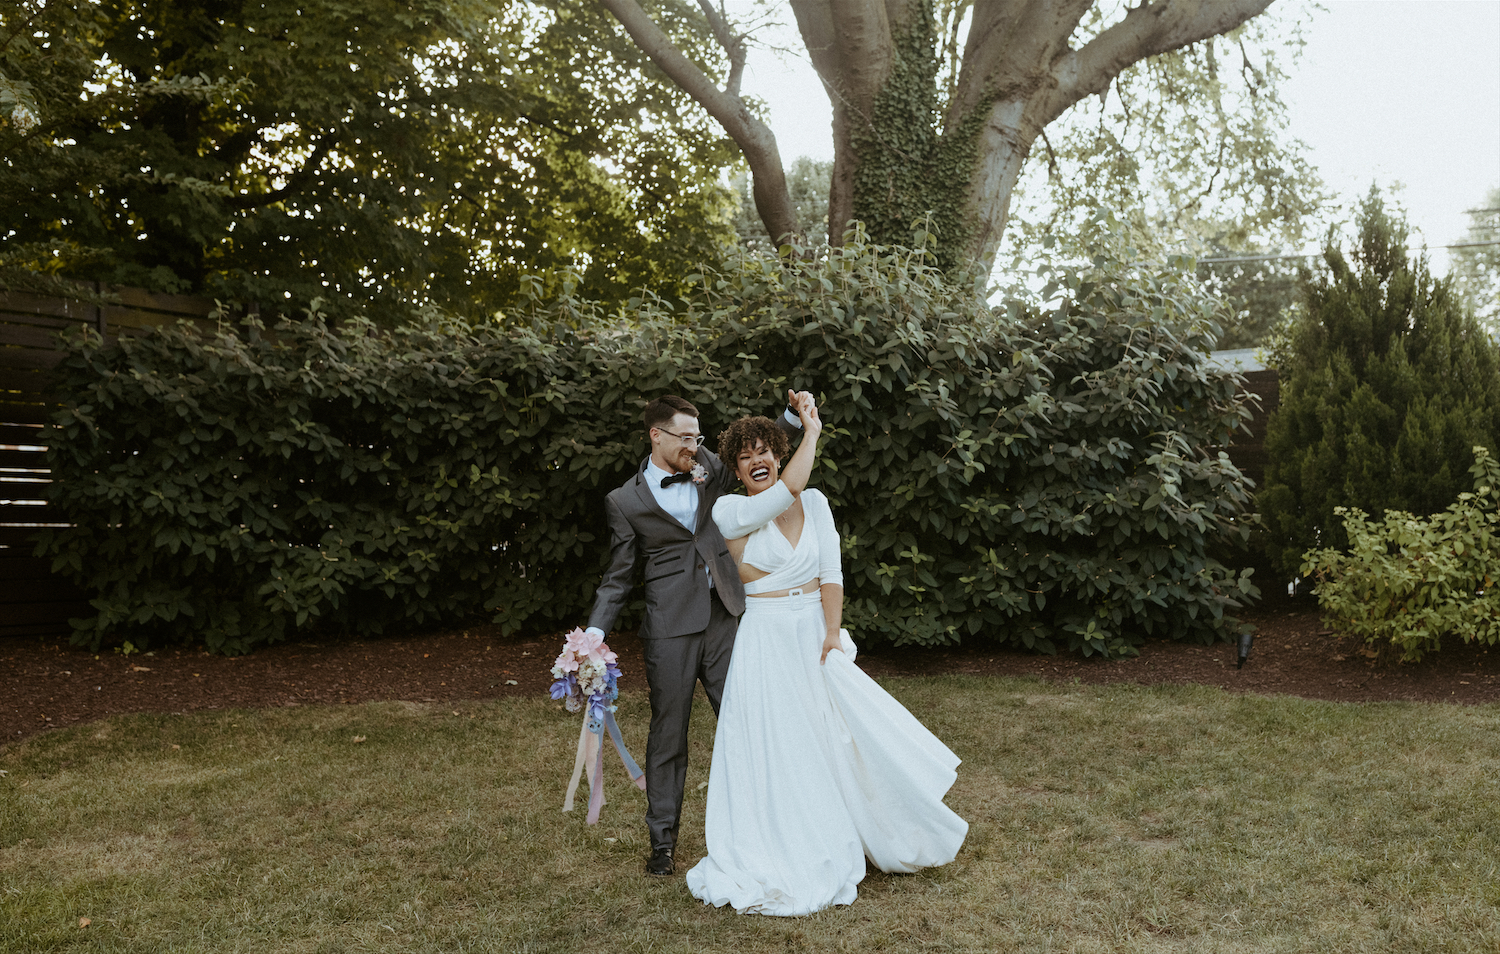 Dreamy styled wedding at The Cordelle in Nashville.